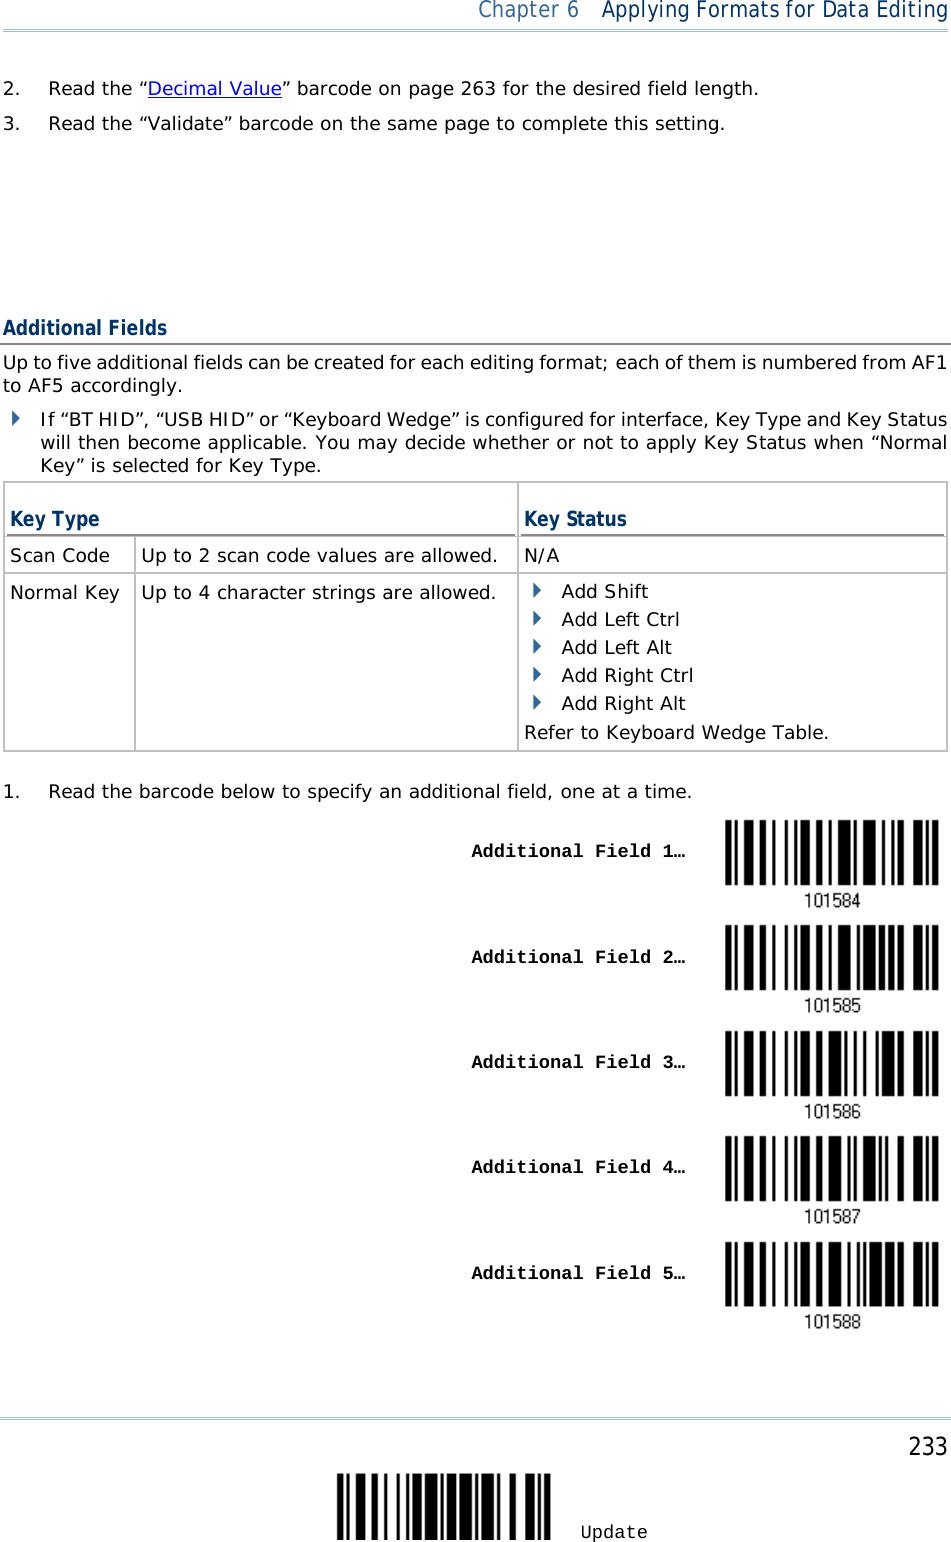  Chapter 6  Applying Formats for Data Editing  2. Read the “Decimal Value” barcode on page 263 for the desired field length. 3. Read the “Validate” barcode on the same page to complete this setting.         Additional Fields Up to five additional fields can be created for each editing format; each of them is numbered from AF1 to AF5 accordingly.  If “BT HID”, “USB HID” or “Keyboard Wedge” is configured for interface, Key Type and Key Status will then become applicable. You may decide whether or not to apply Key Status when “Normal Key” is selected for Key Type.  Key Type Key Status Scan Code  Up to 2 scan code values are allowed. N/A Normal Key  Up to 4 character strings are allowed.  Add Shift  Add Left Ctrl  Add Left Alt  Add Right Ctrl  Add Right Alt Refer to Keyboard Wedge Table.   1. Read the barcode below to specify an additional field, one at a time.    Additional Field 1…     Additional Field 2…     Additional Field 3…     Additional Field 4…     Additional Field 5…      233 Update 